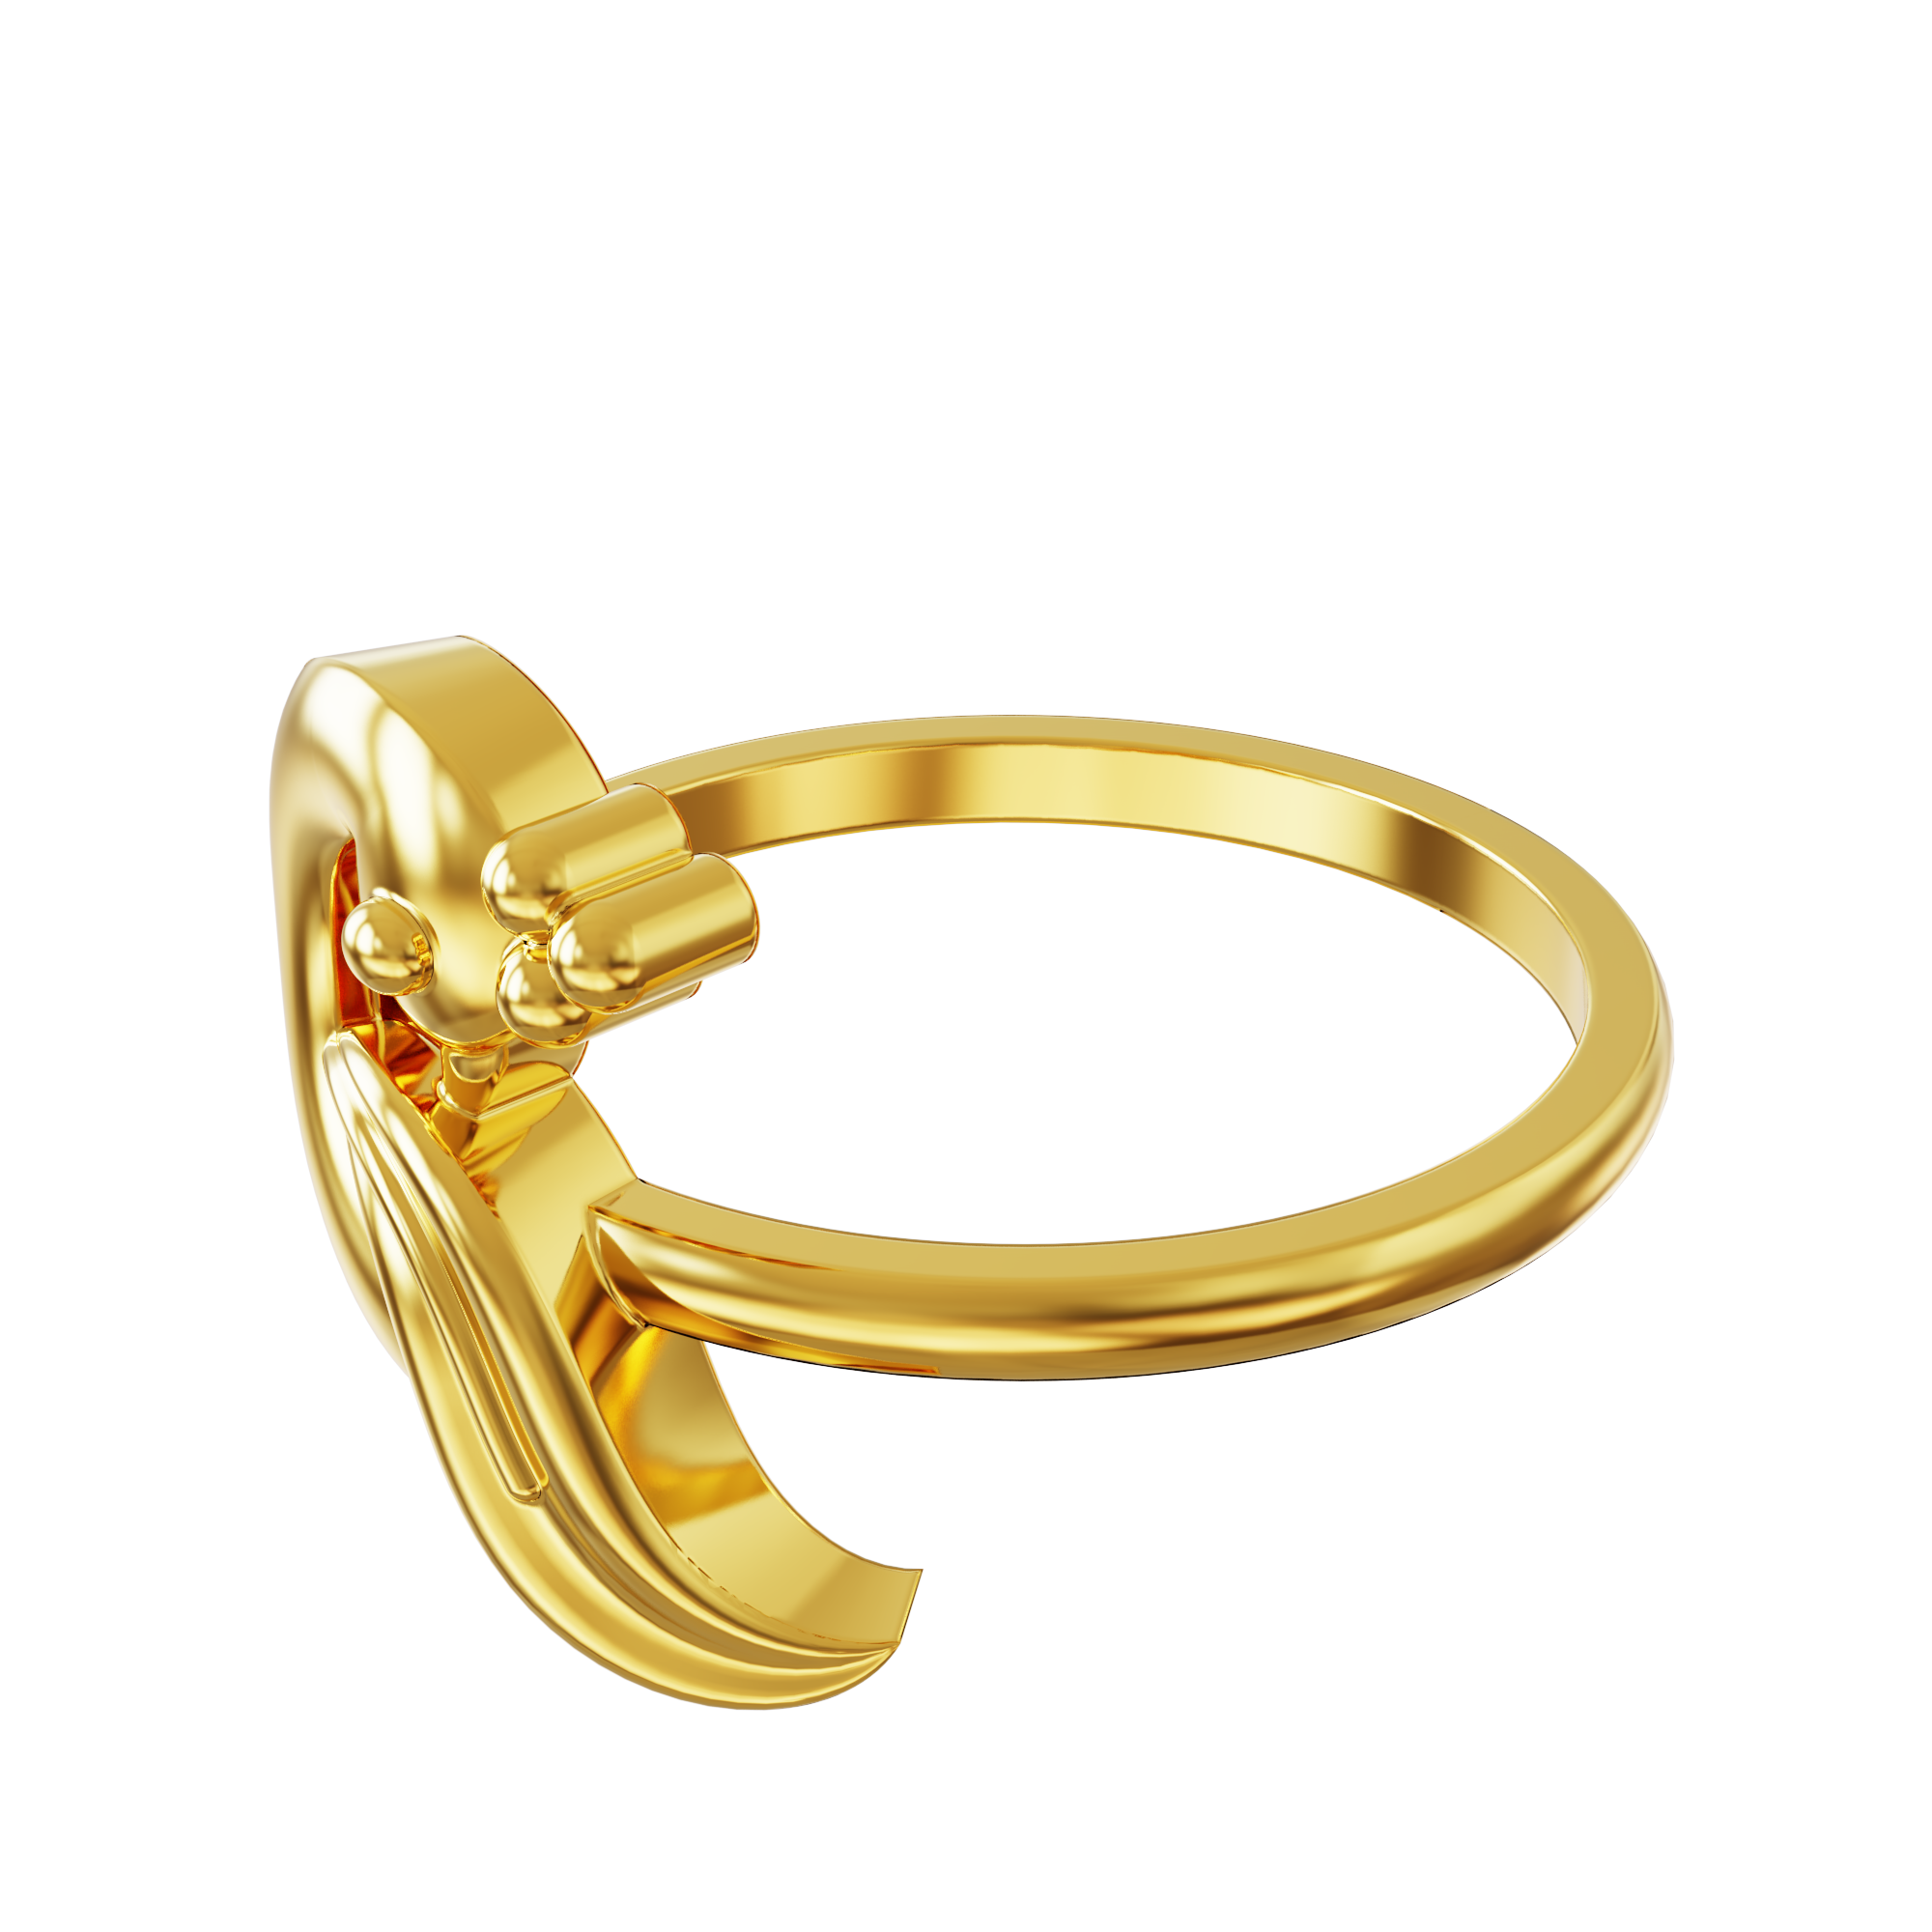 Shy-peacock-design-gold-ring